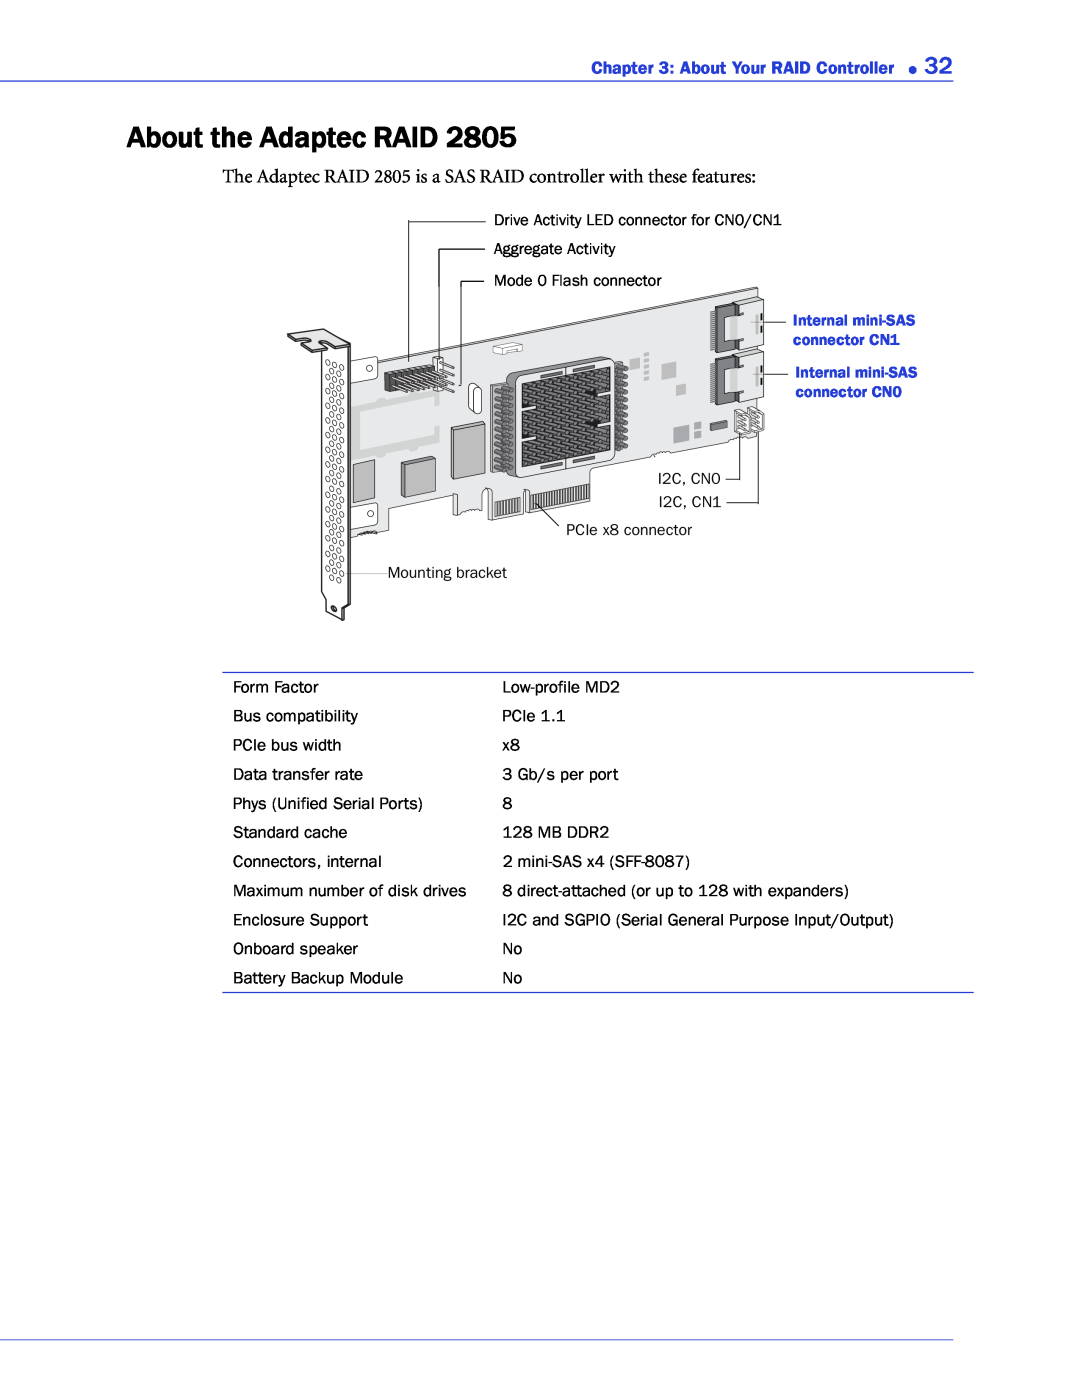 Adaptec 2268300R manual About the Adaptec RAID, The Adaptec RAID 2805 is a SAS RAID controller with these features 